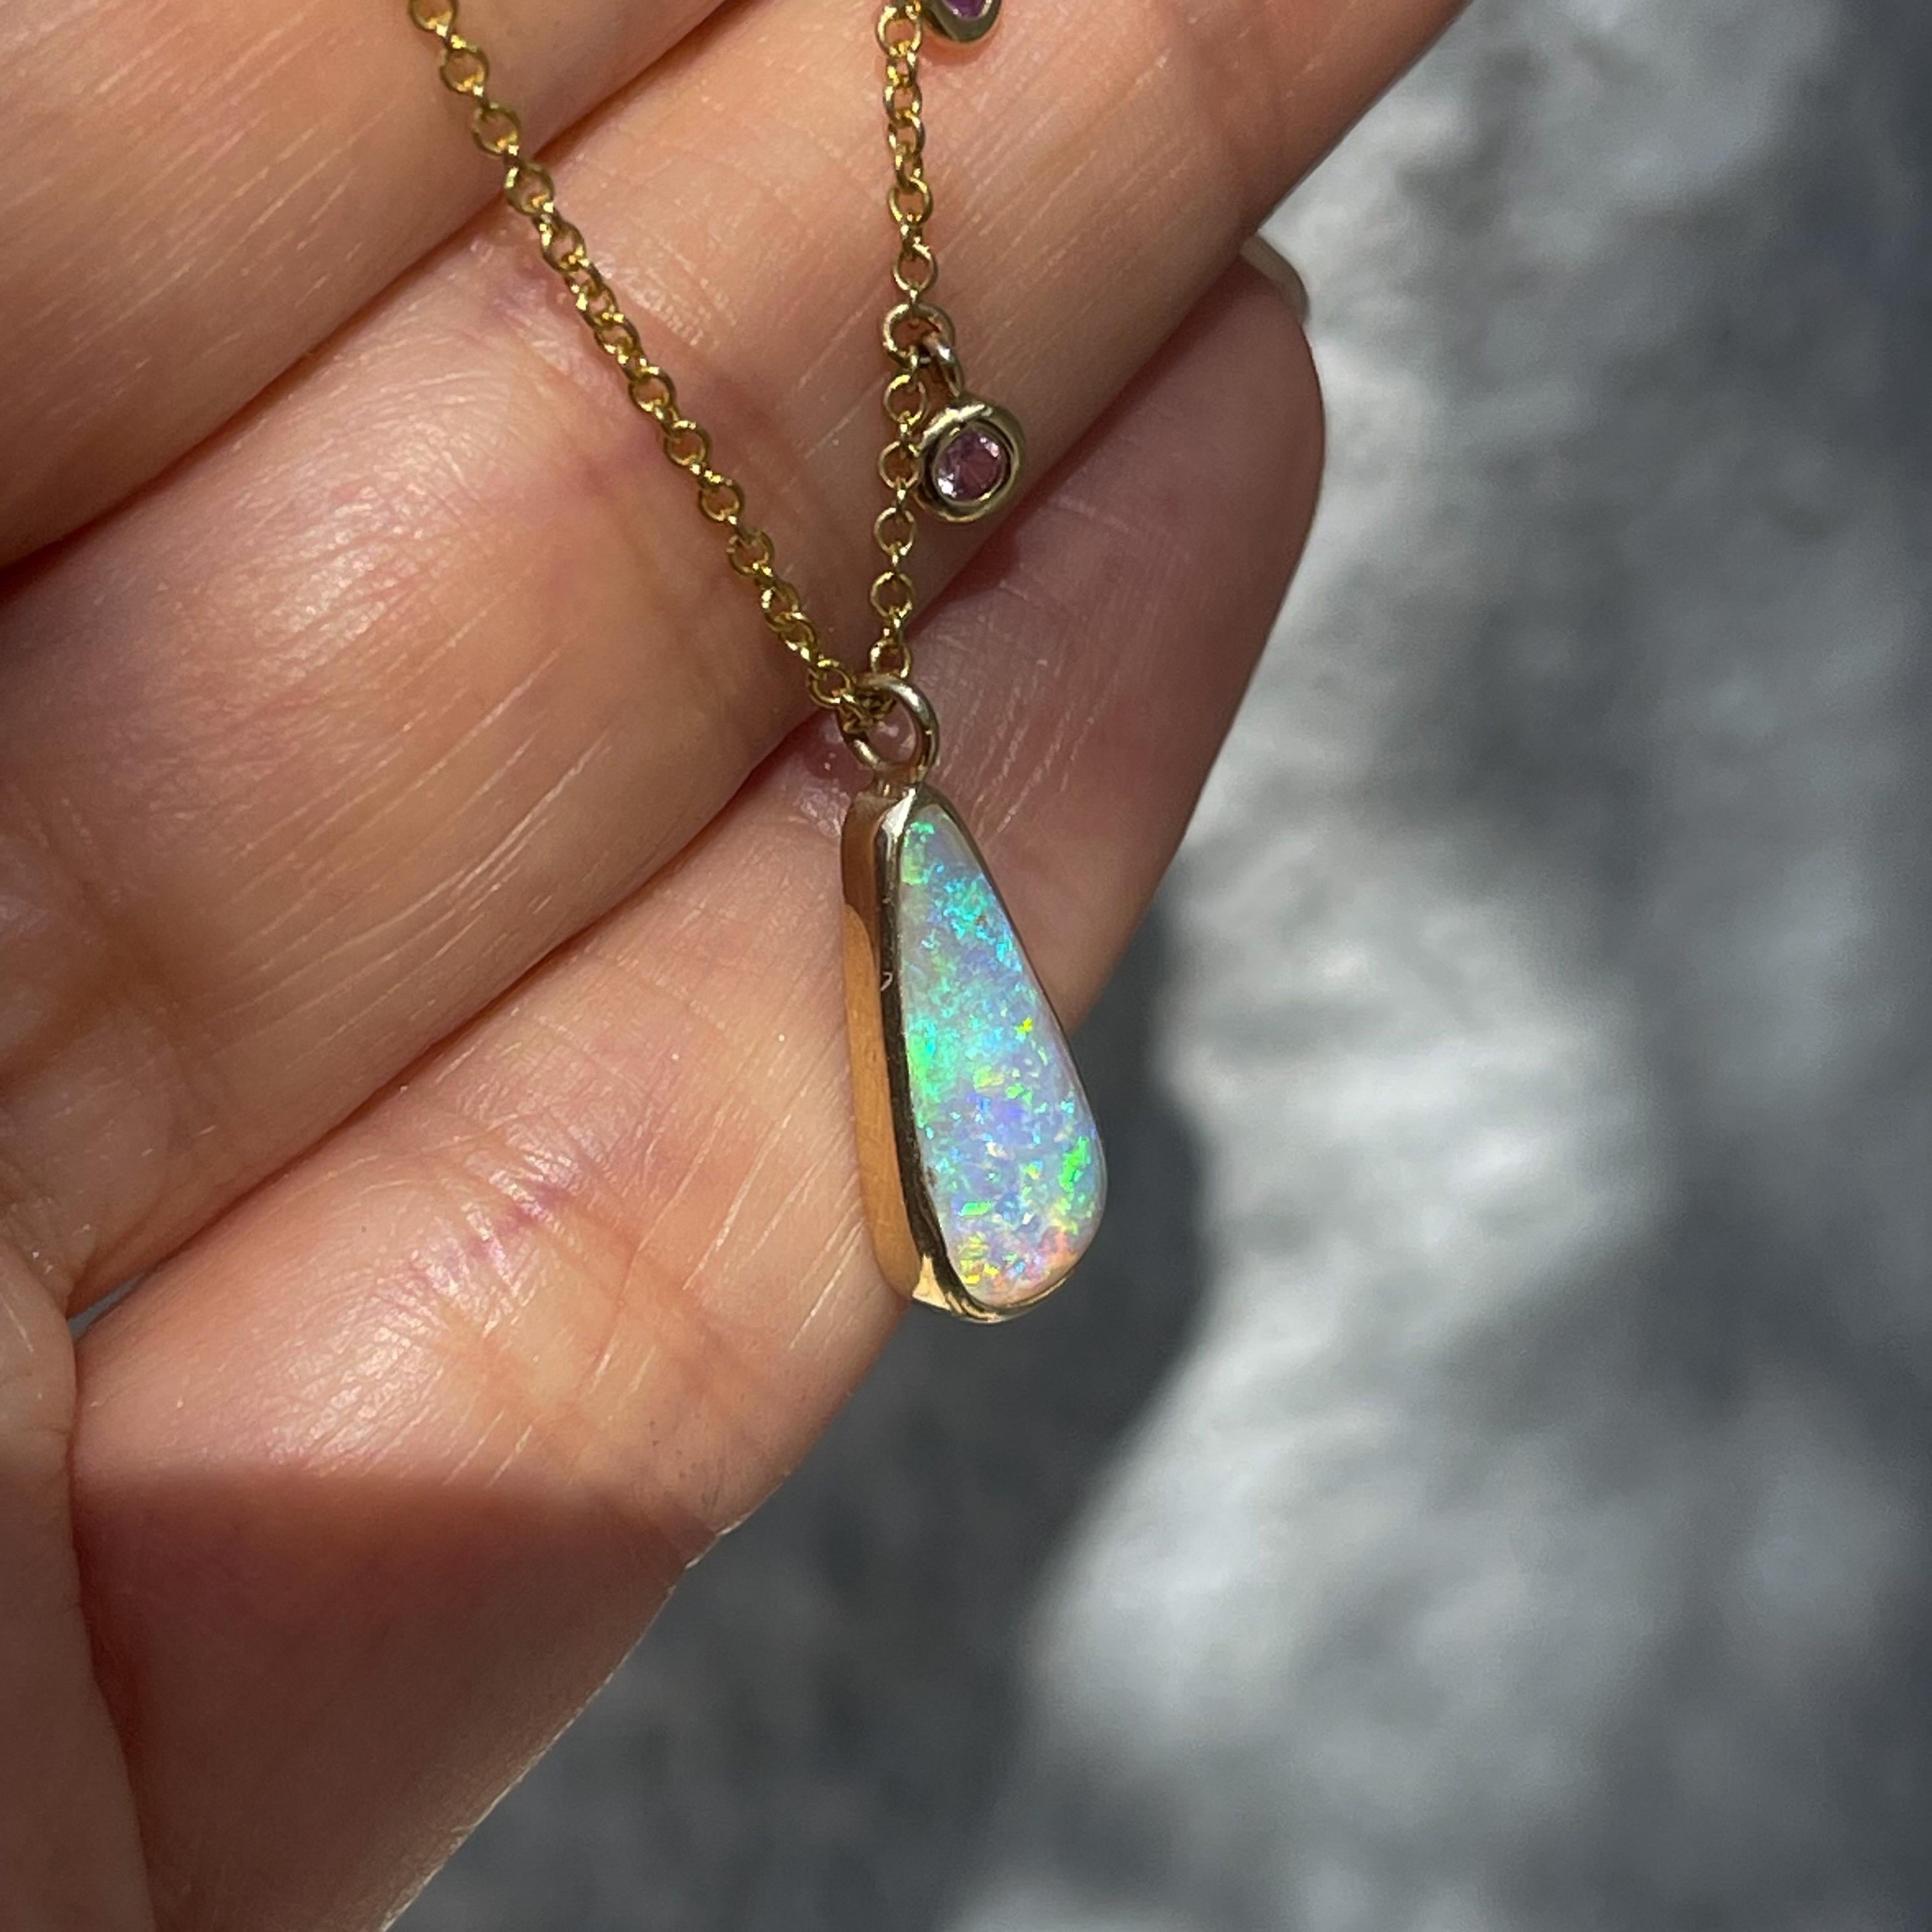 NIXIN Jewelry Dawn's Light Australian Opal Necklace with Sapphires in Rose Gold 1